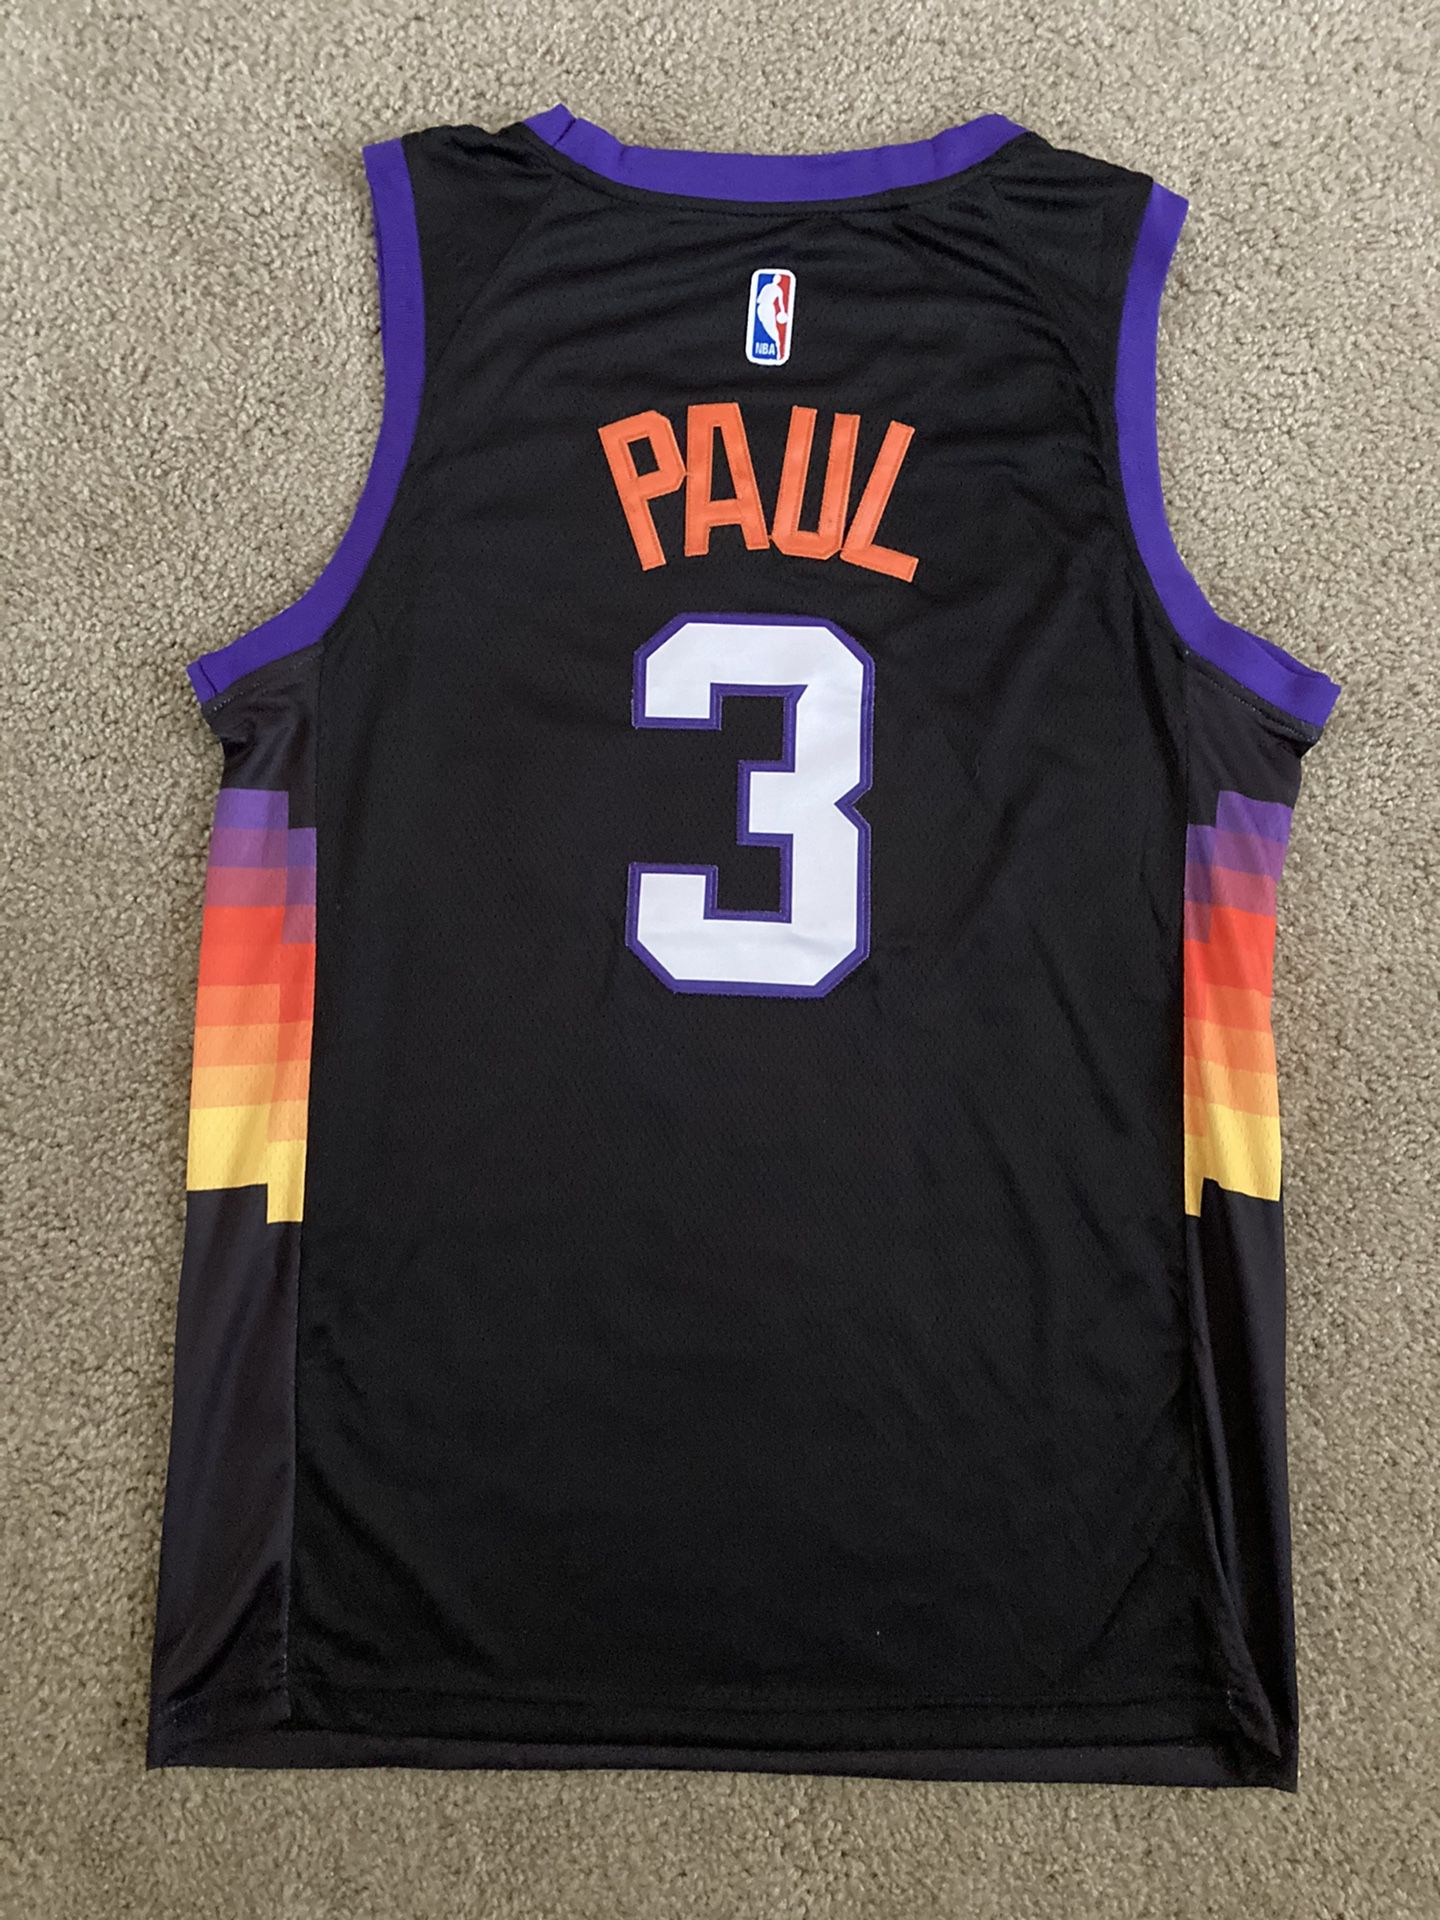 Phoenix Suns CP3 The Valley Basketball Jersey for Sale in Mesa, AZ - OfferUp